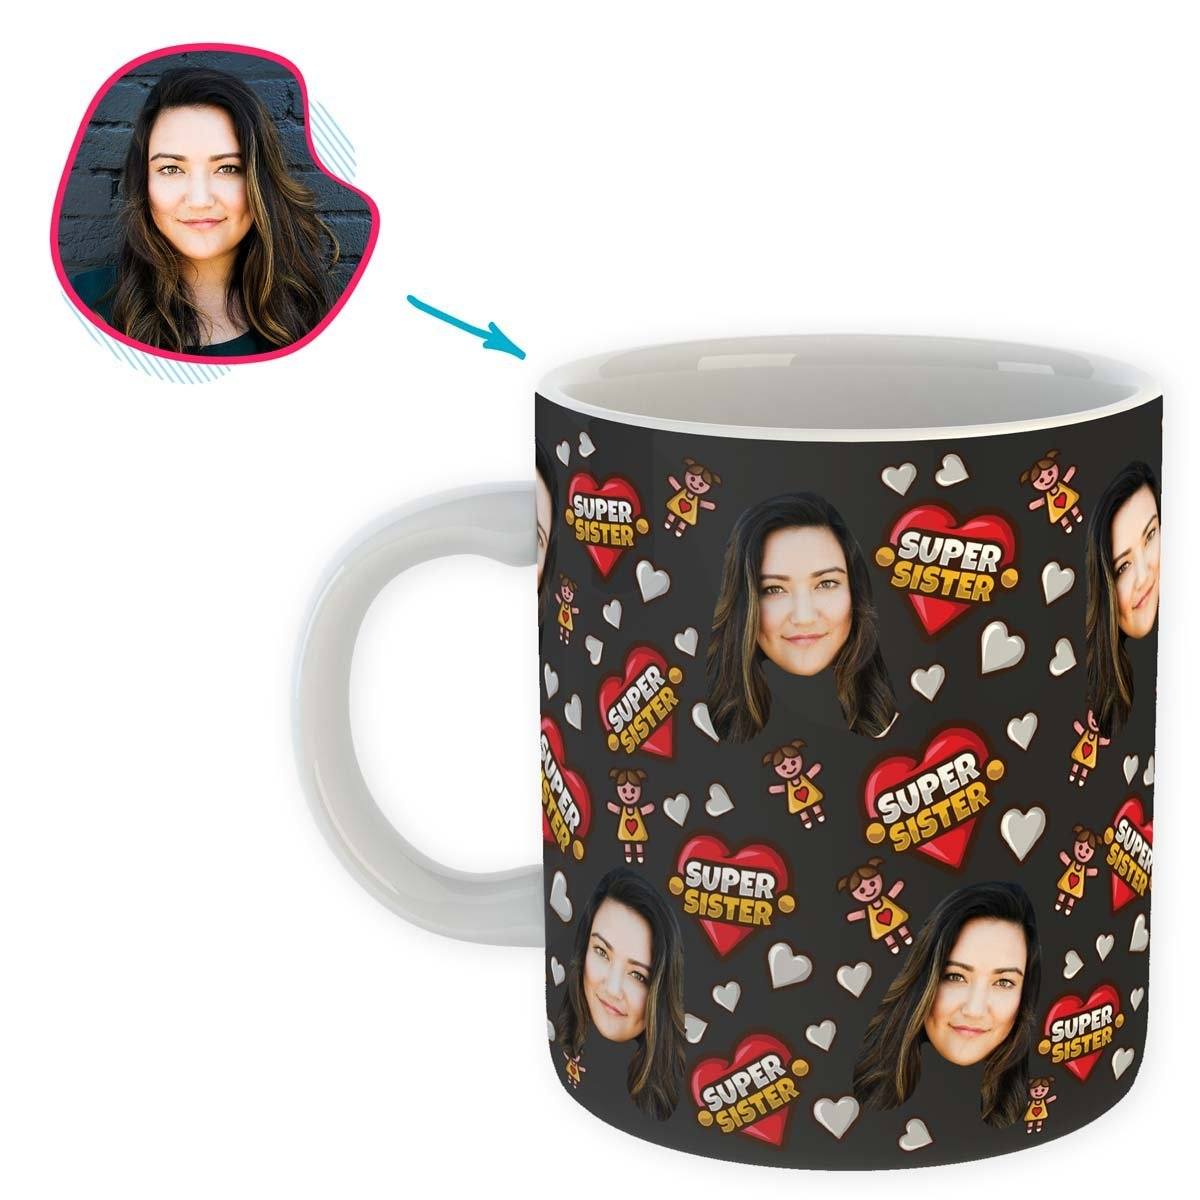 dark Super Sister mug personalized with photo of face printed on it